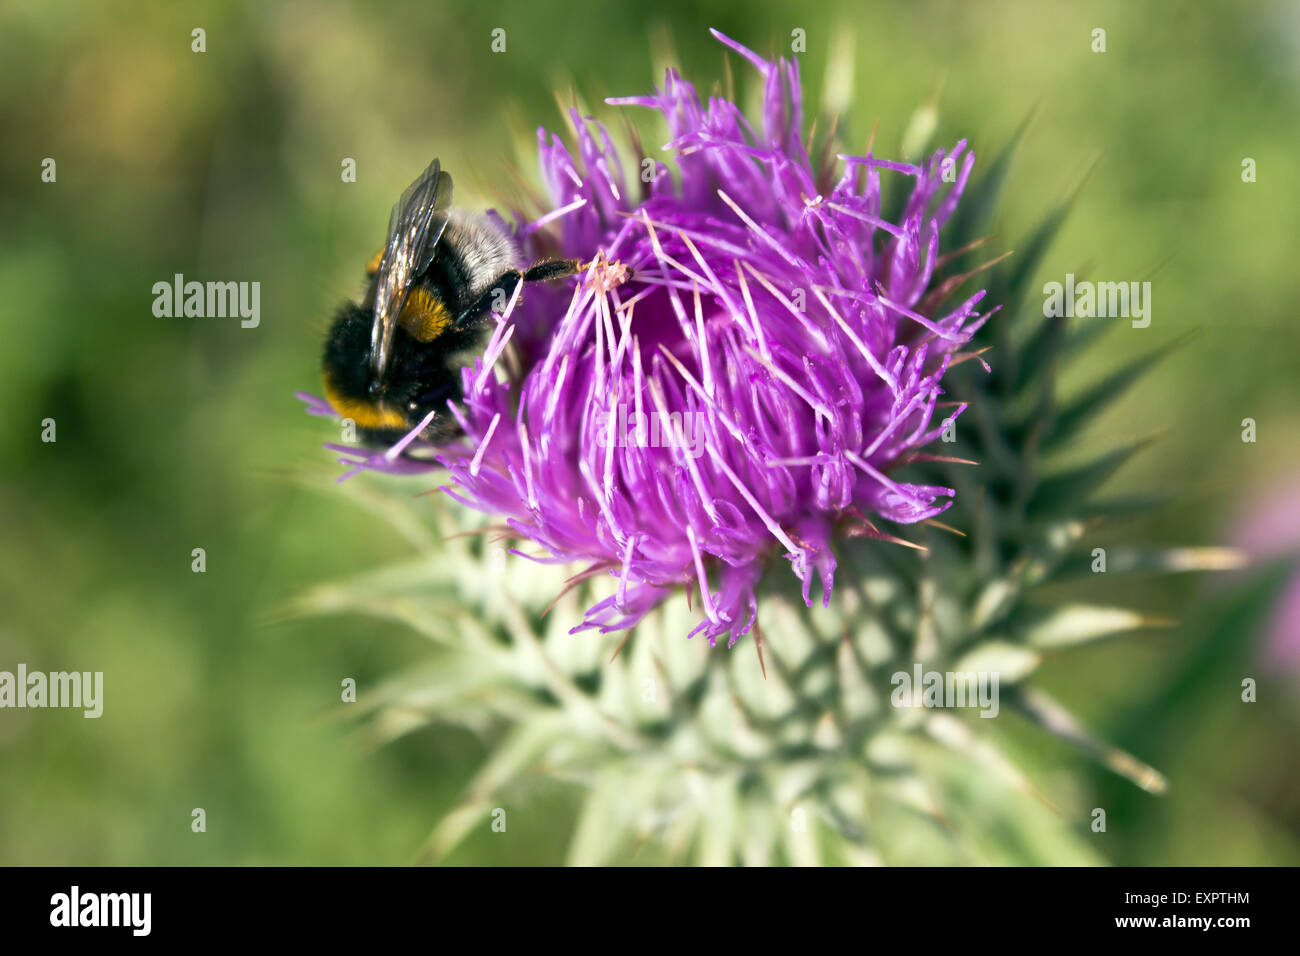 Flower of milk thistle or silybum marianum with bee Stock Photo